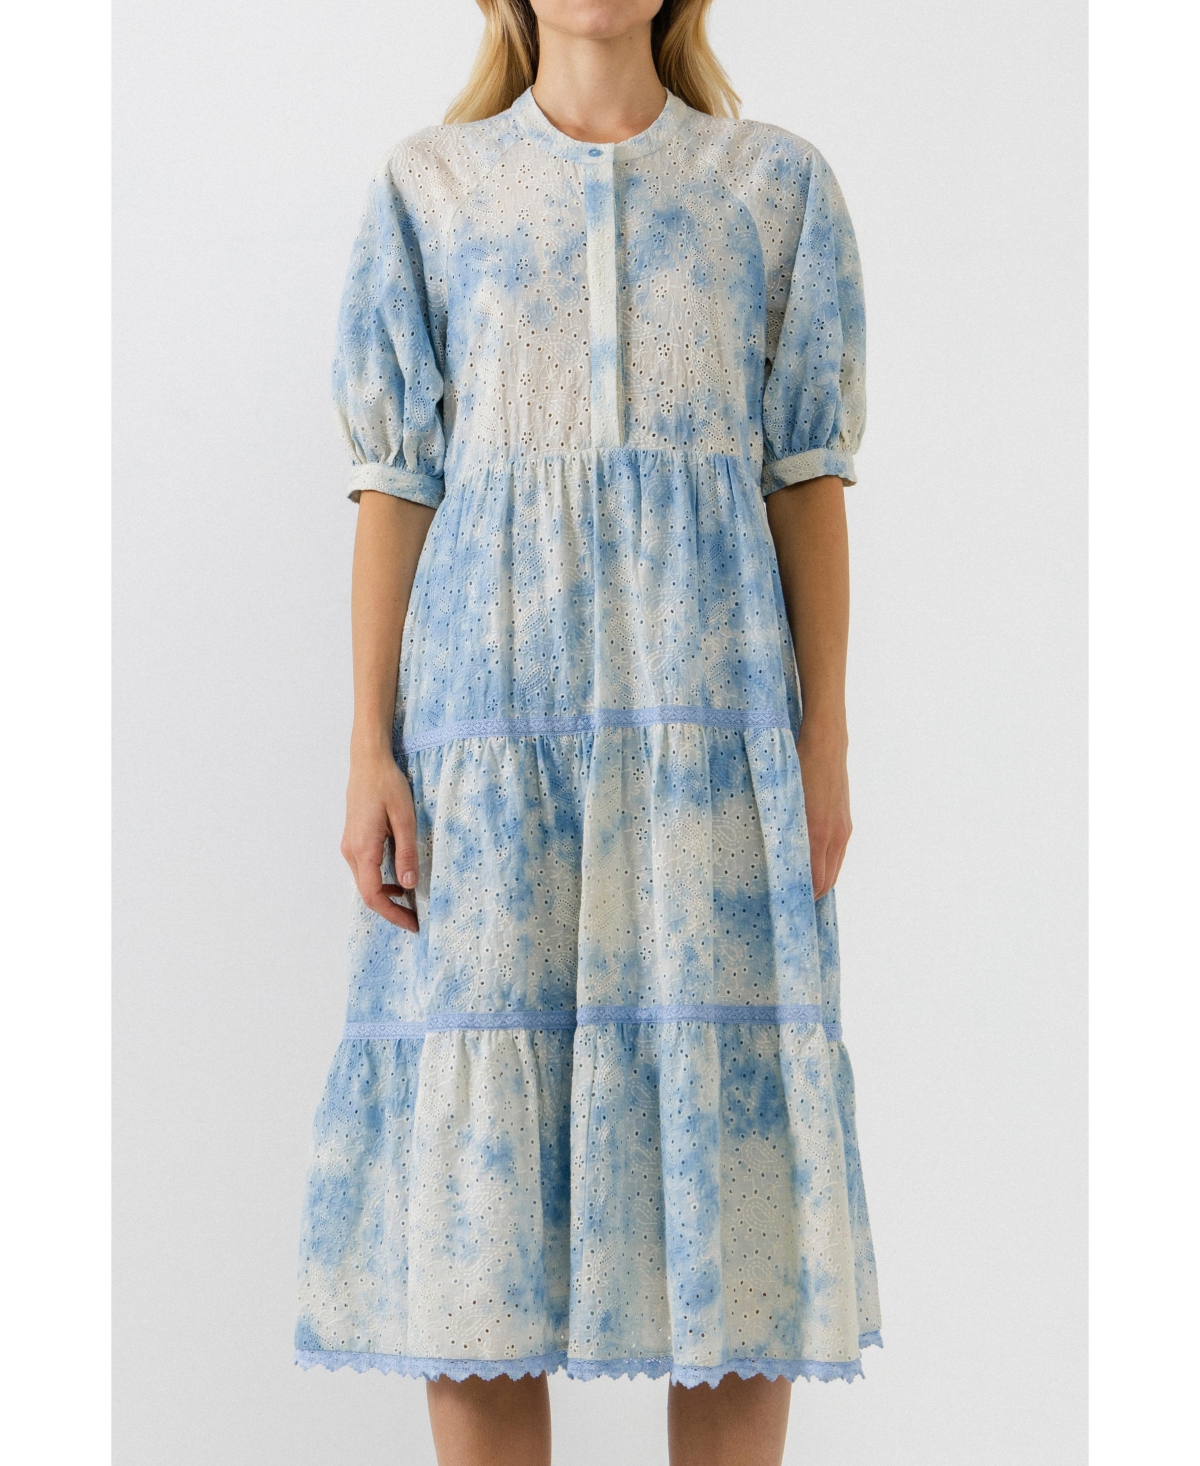 Women's Paisely Eyelet Midi Dress with Tie-dye Effect - Blue